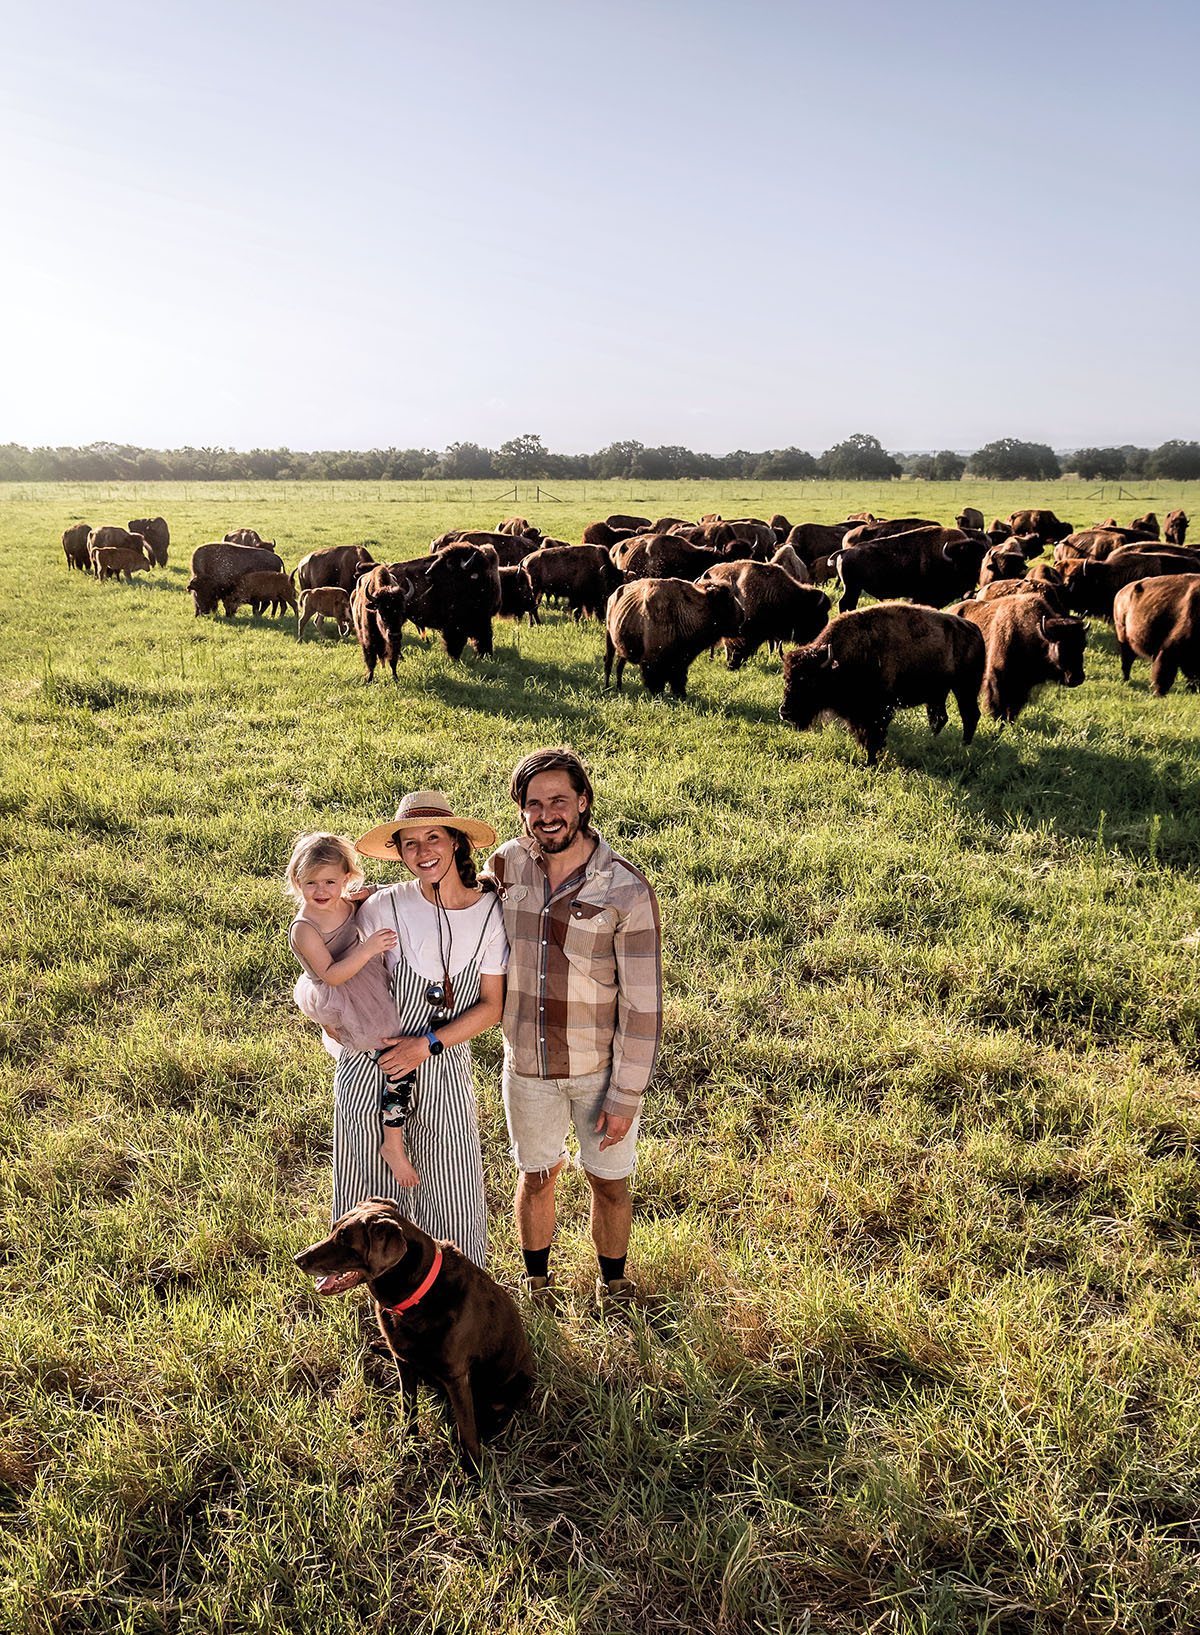 A family stands in a field of bison unerneath a blue sky